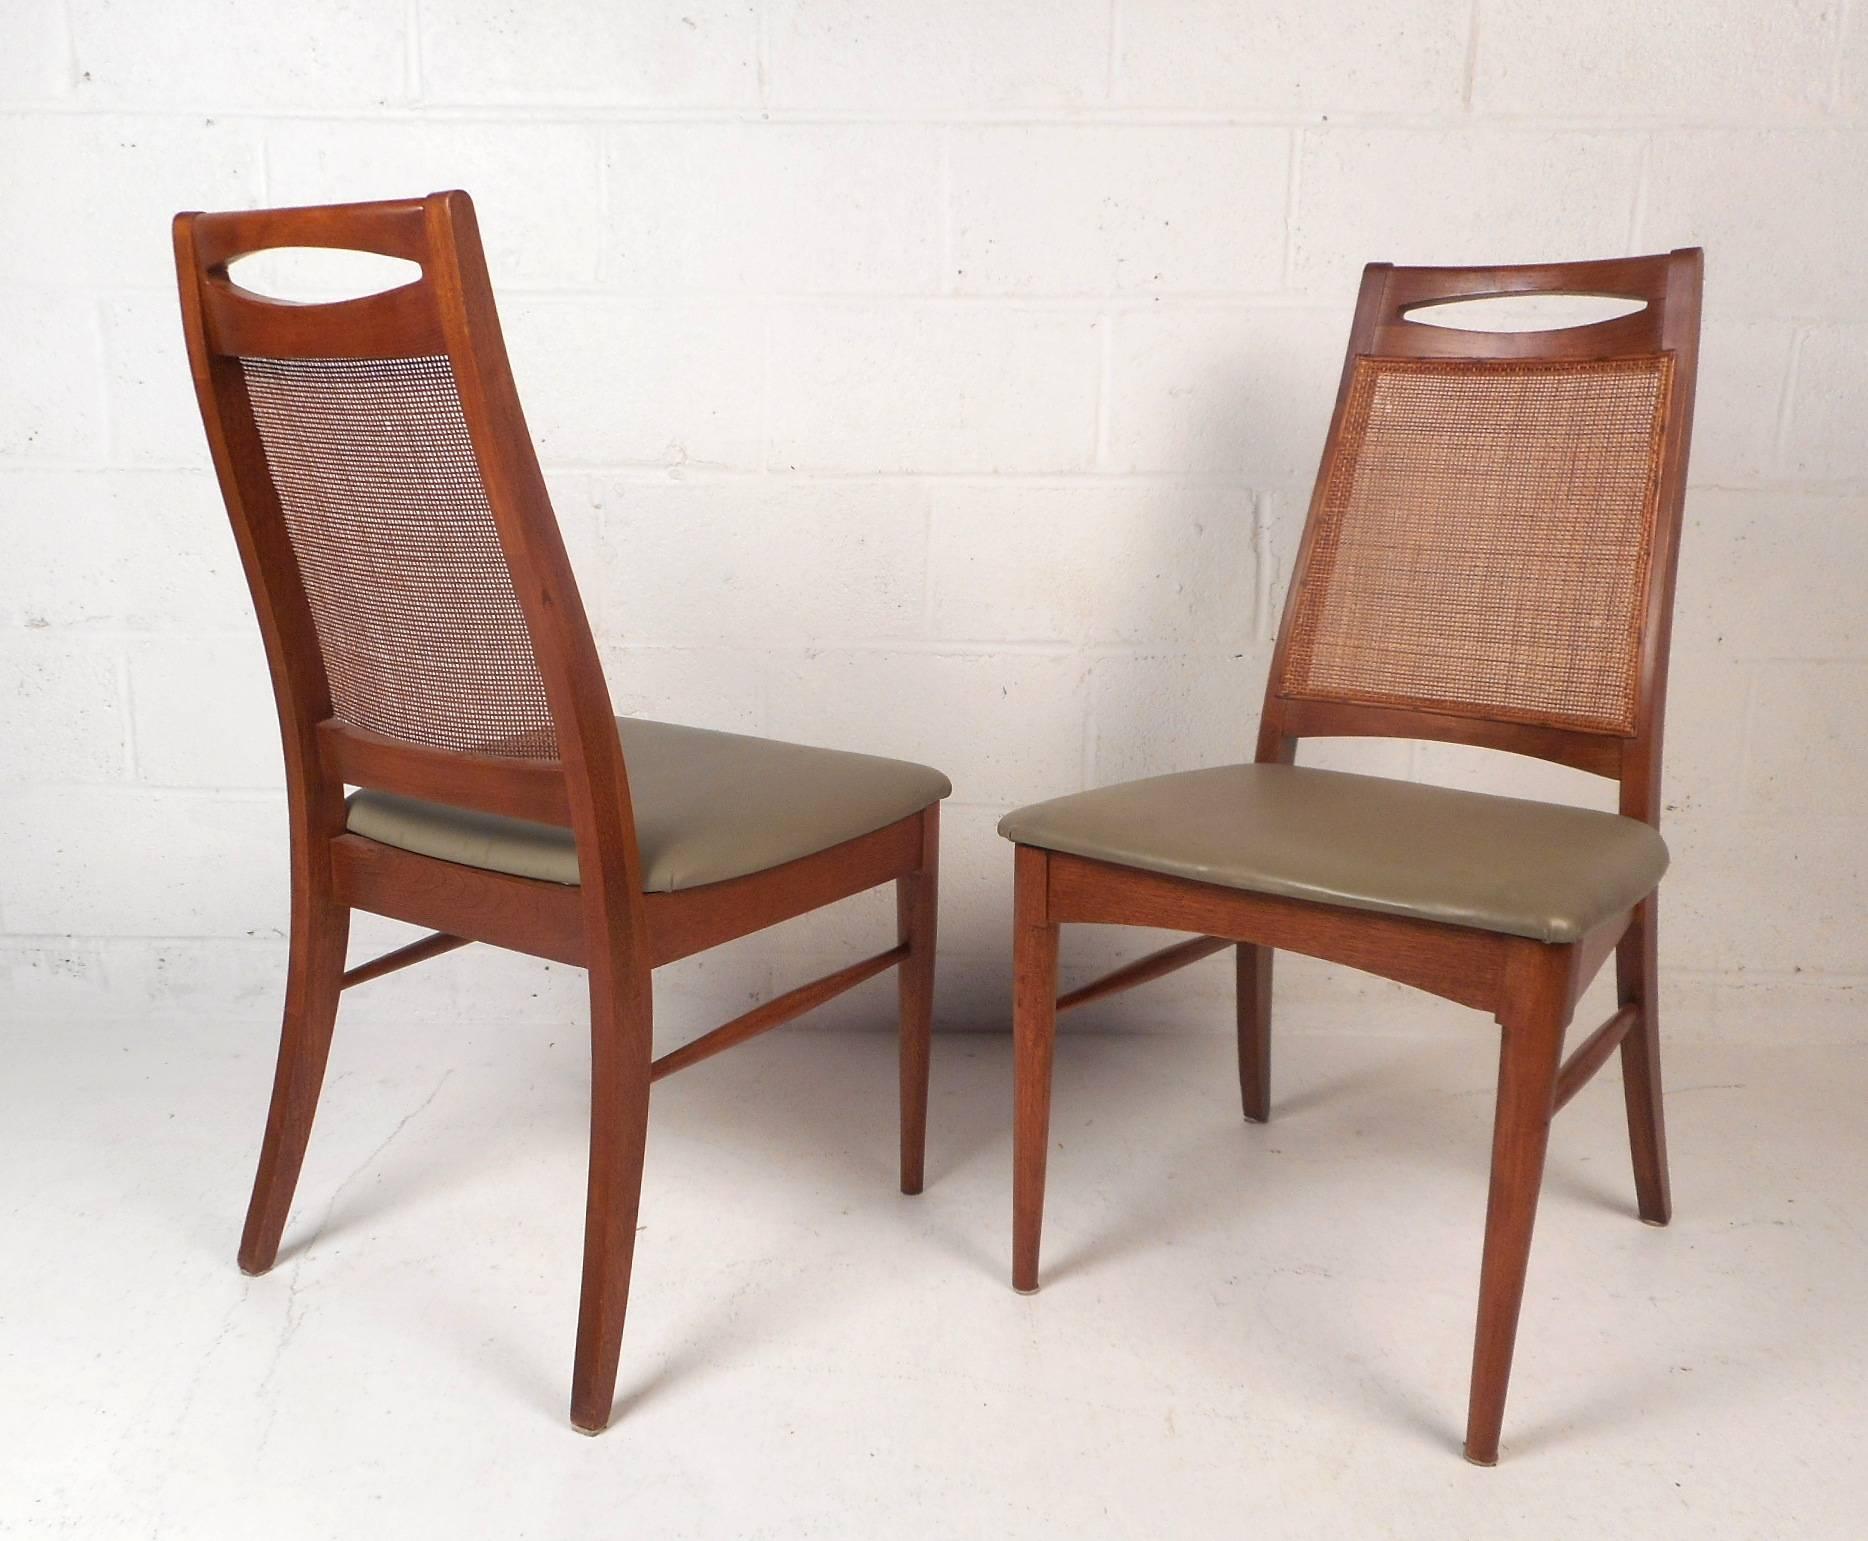 This gorgeous midcentury set includes six dining chairs and two armchairs. A very unique design with an oblong cut-out by the head rest and a cane backrest. The sculpted walnut frame has tapered stretchers connecting the front legs to the back legs.